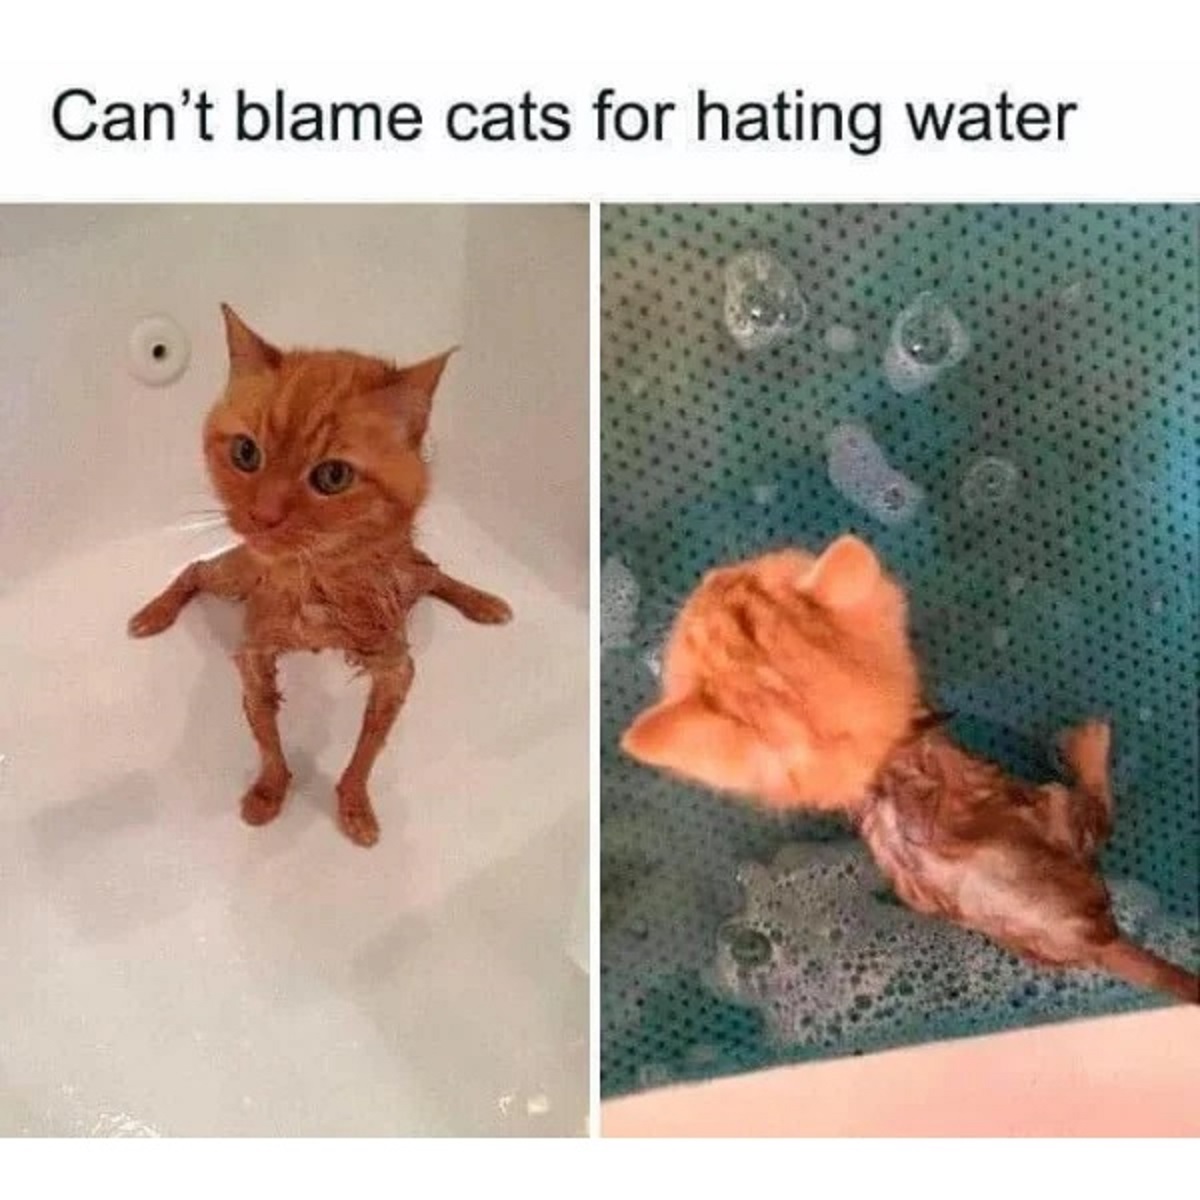 exe cats - Can't blame cats for hating water